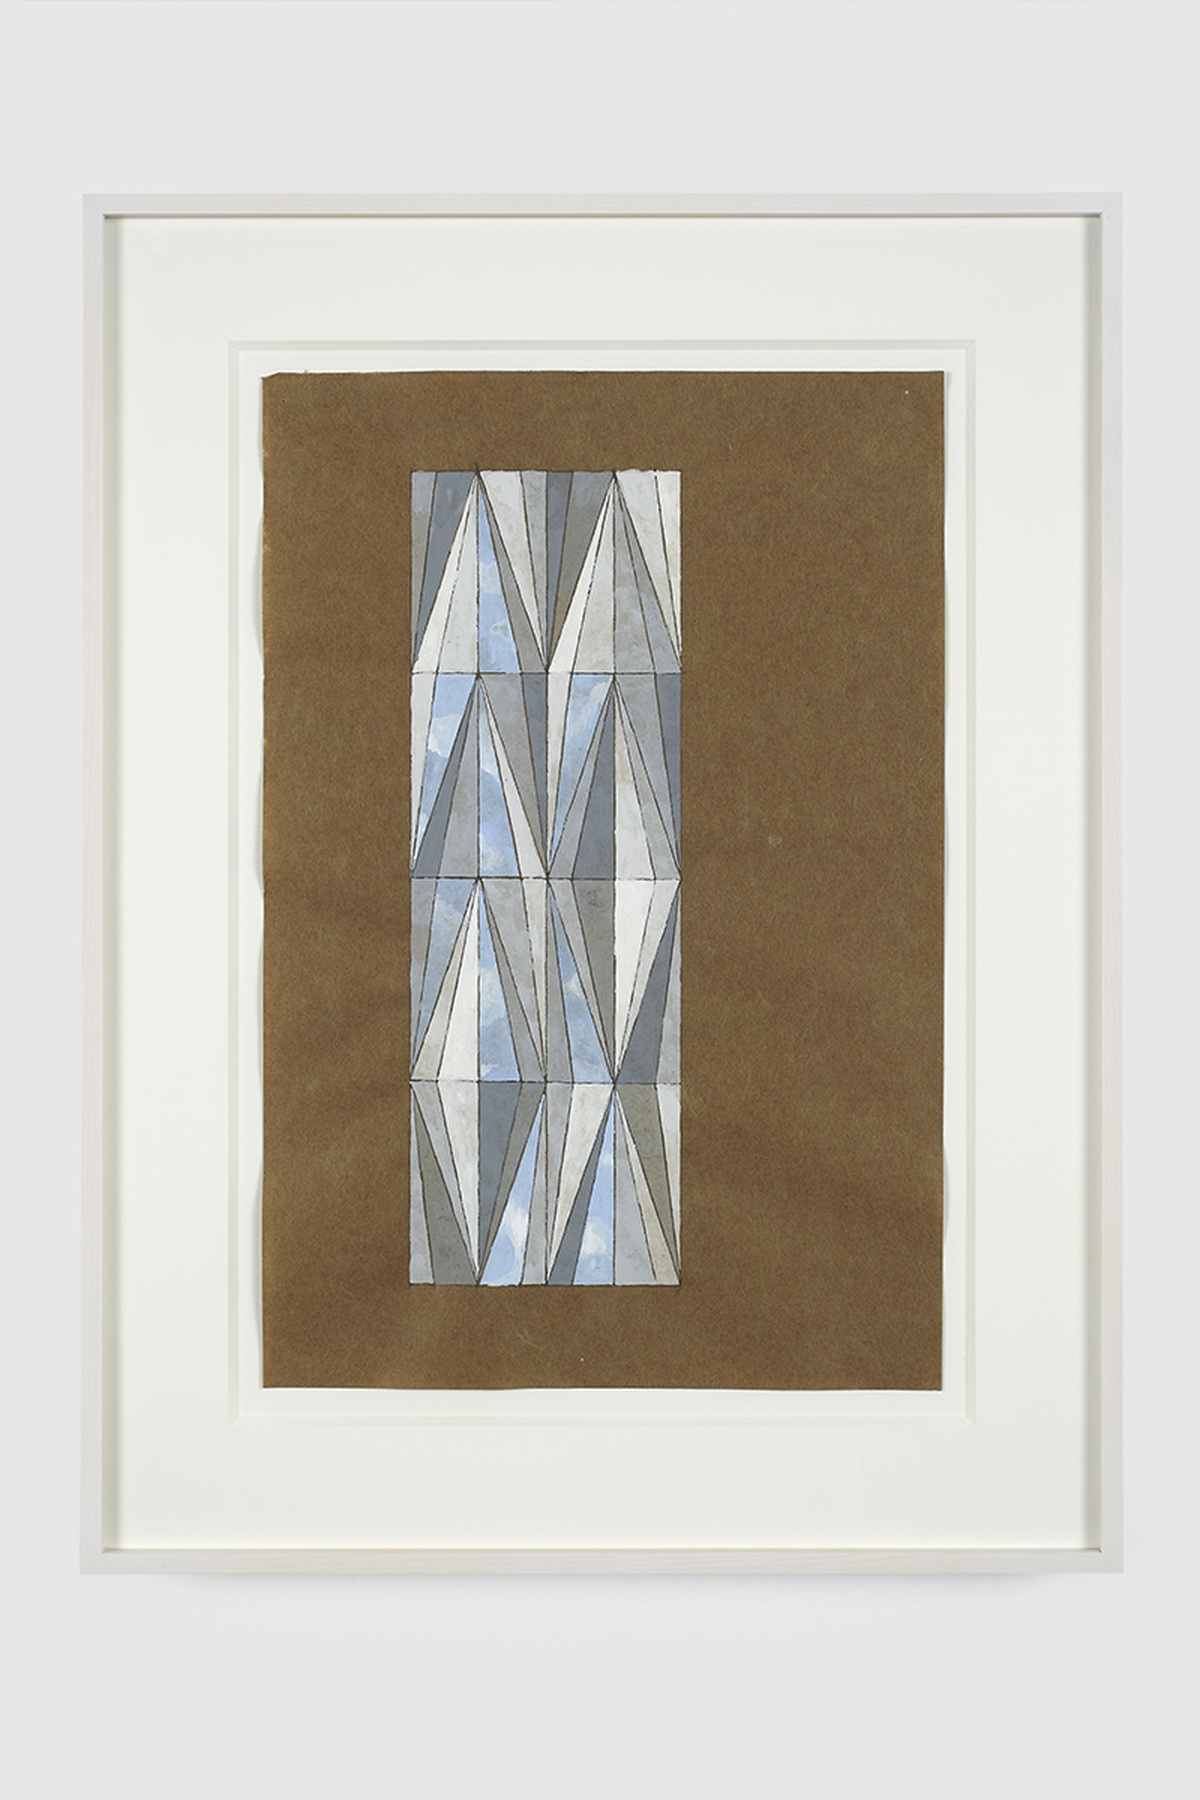 84.Hoeber_Bas-Relief Tile and Facade, 2015_Gouache and graphite on mulberry paper_15 x 10in